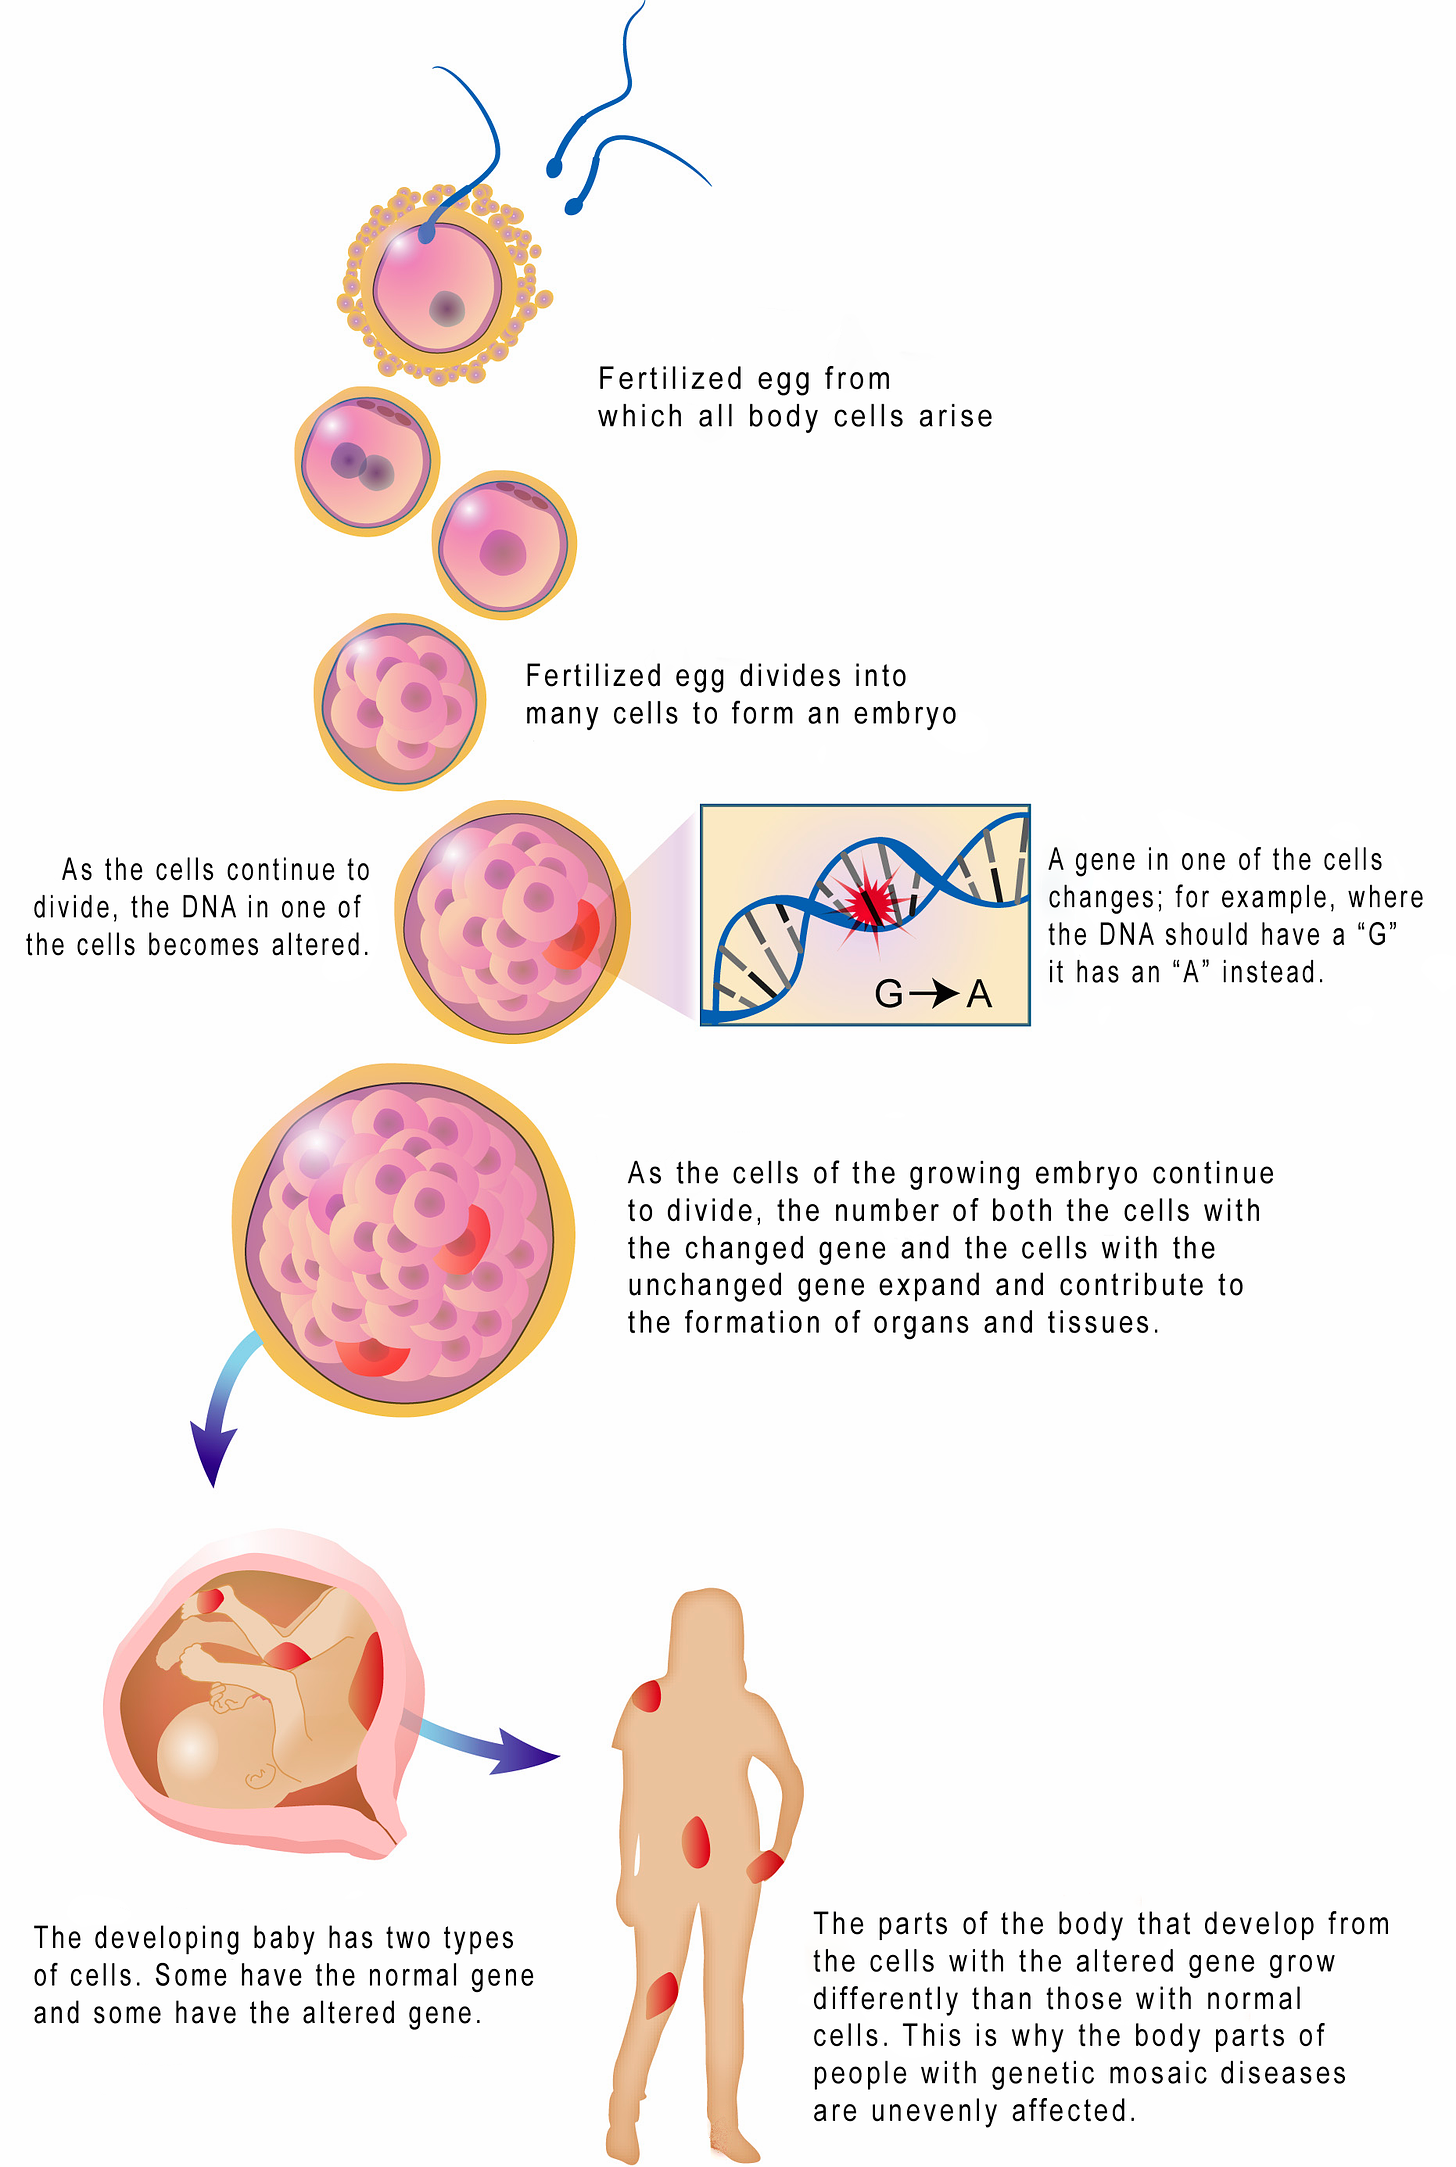 https://www.lgdalliance.org/genetic-mosaisism-graphic-2/